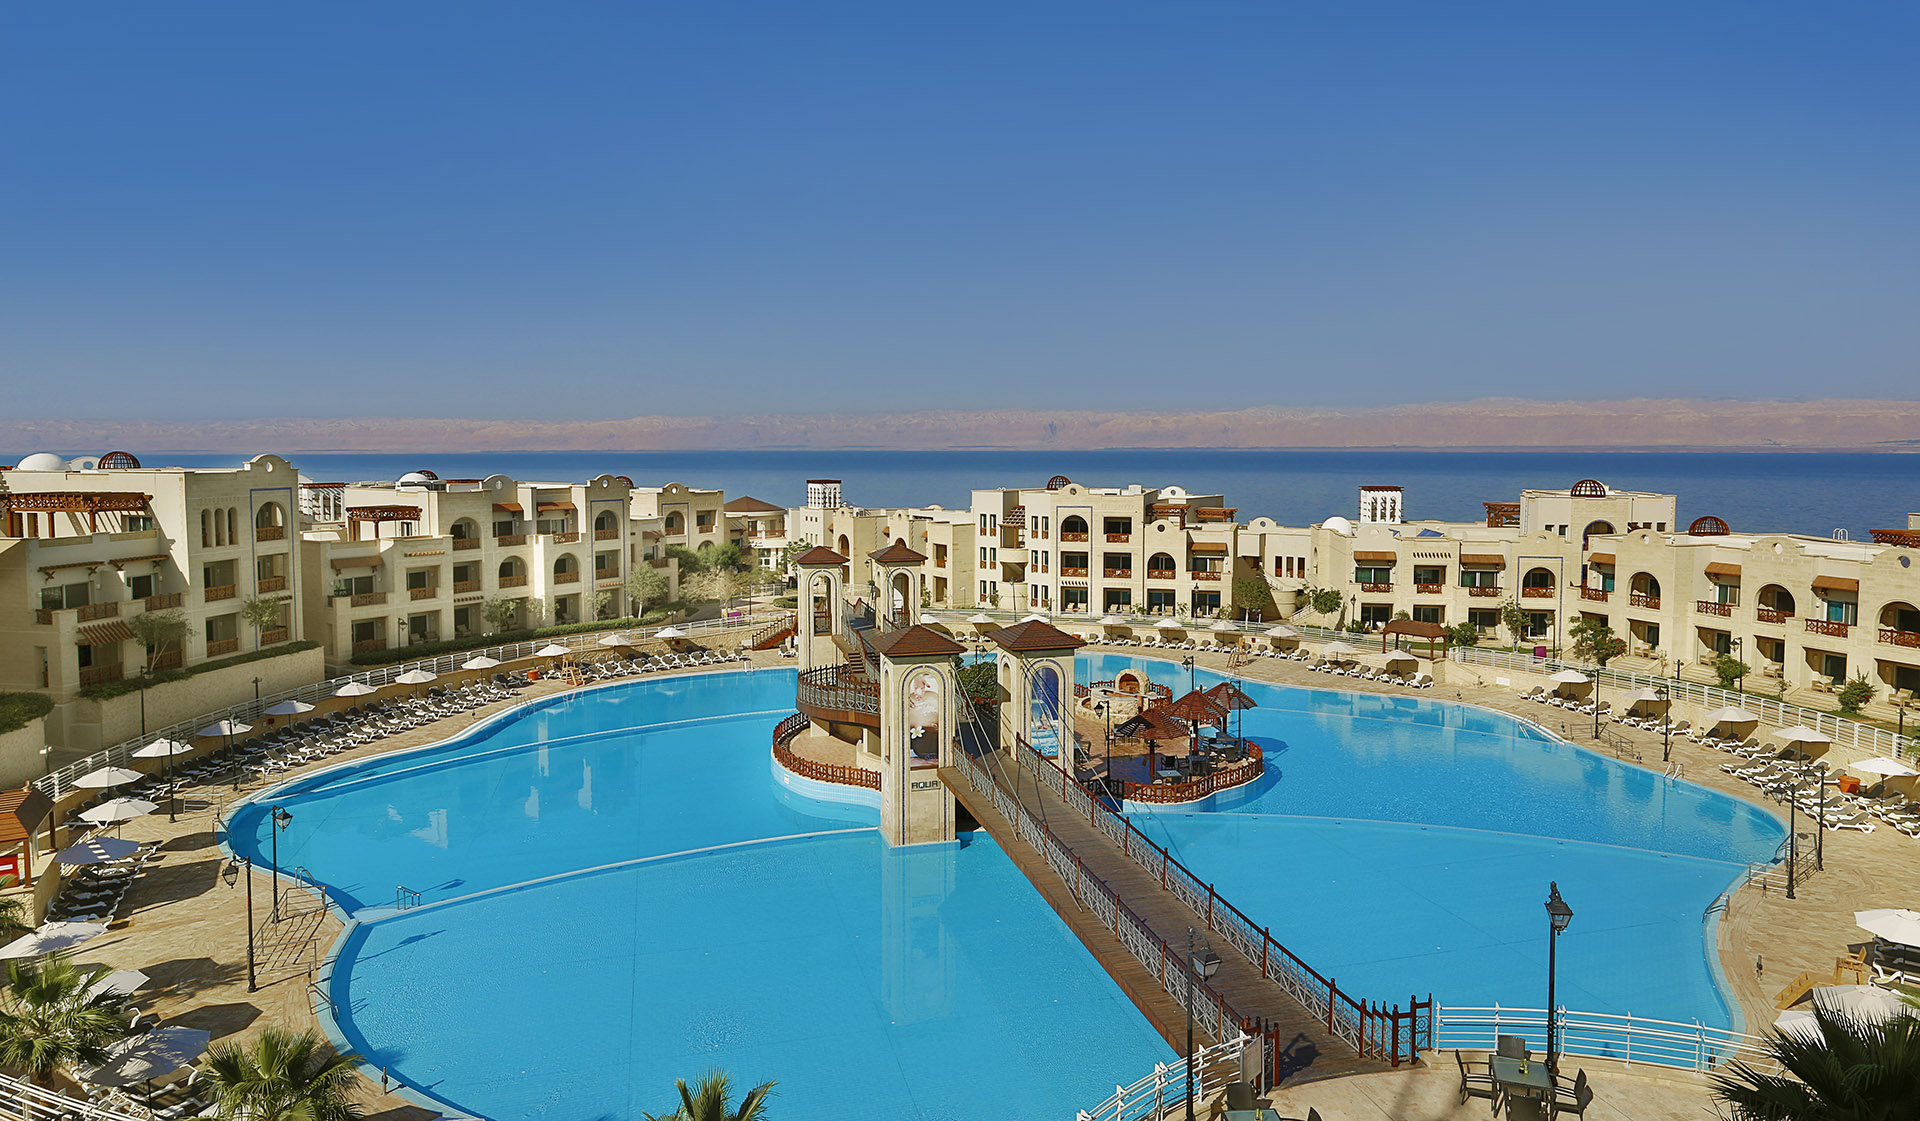 patron Initiativ Betjene Crowne Plaza Dead Sea Jordan- Suweima, Jordan Hotels- First Class Hotels in  Suweima- GDS Reservation Codes -Hotel Search by Hotel & Travel Index:  Travel Weekly China